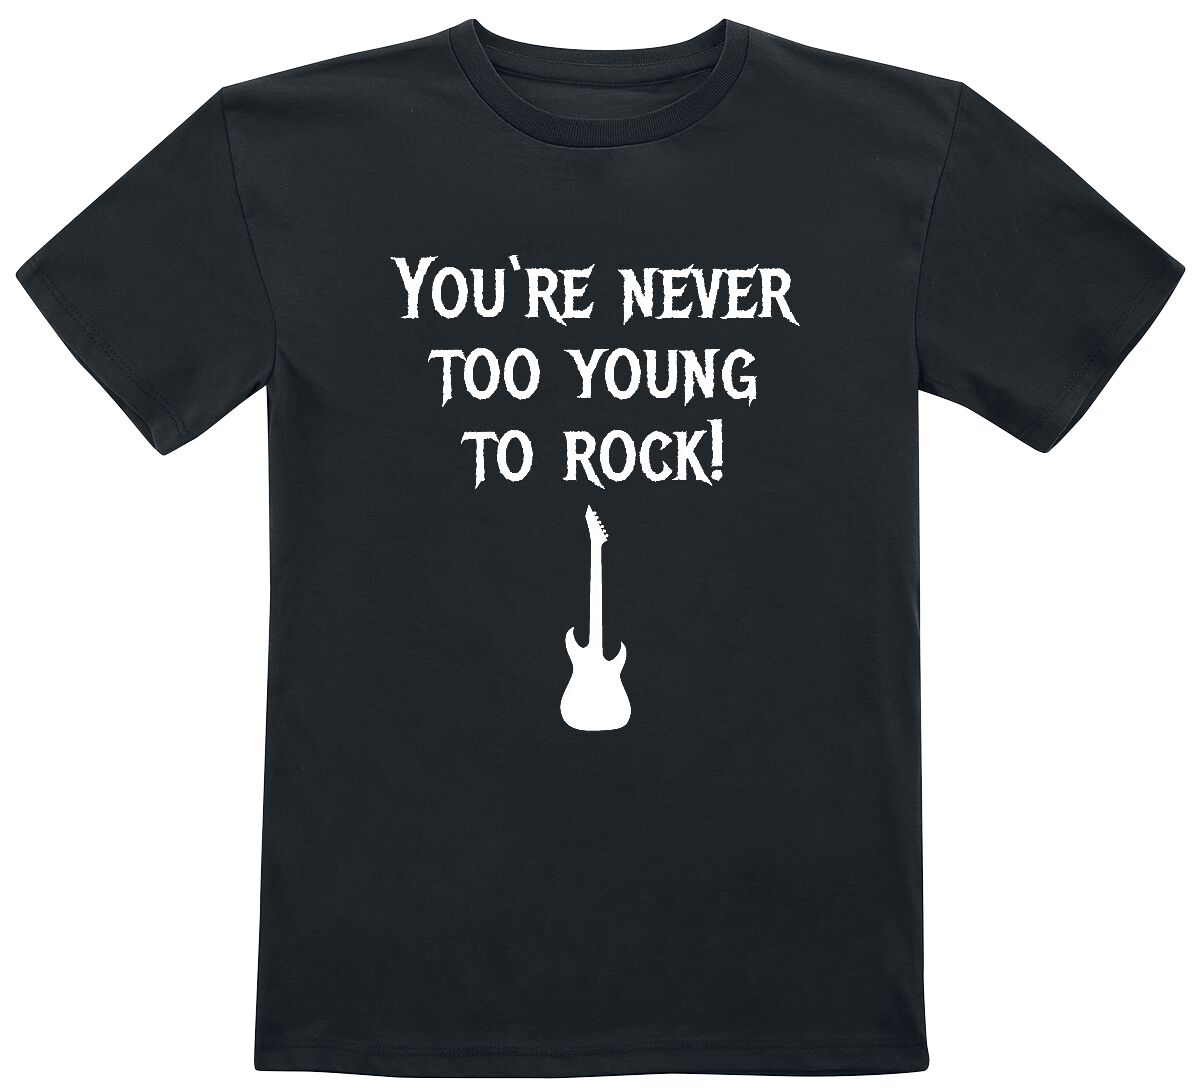 Sprüche Kids - You`re Never Too Young To Rock! T-Shirt schwarz